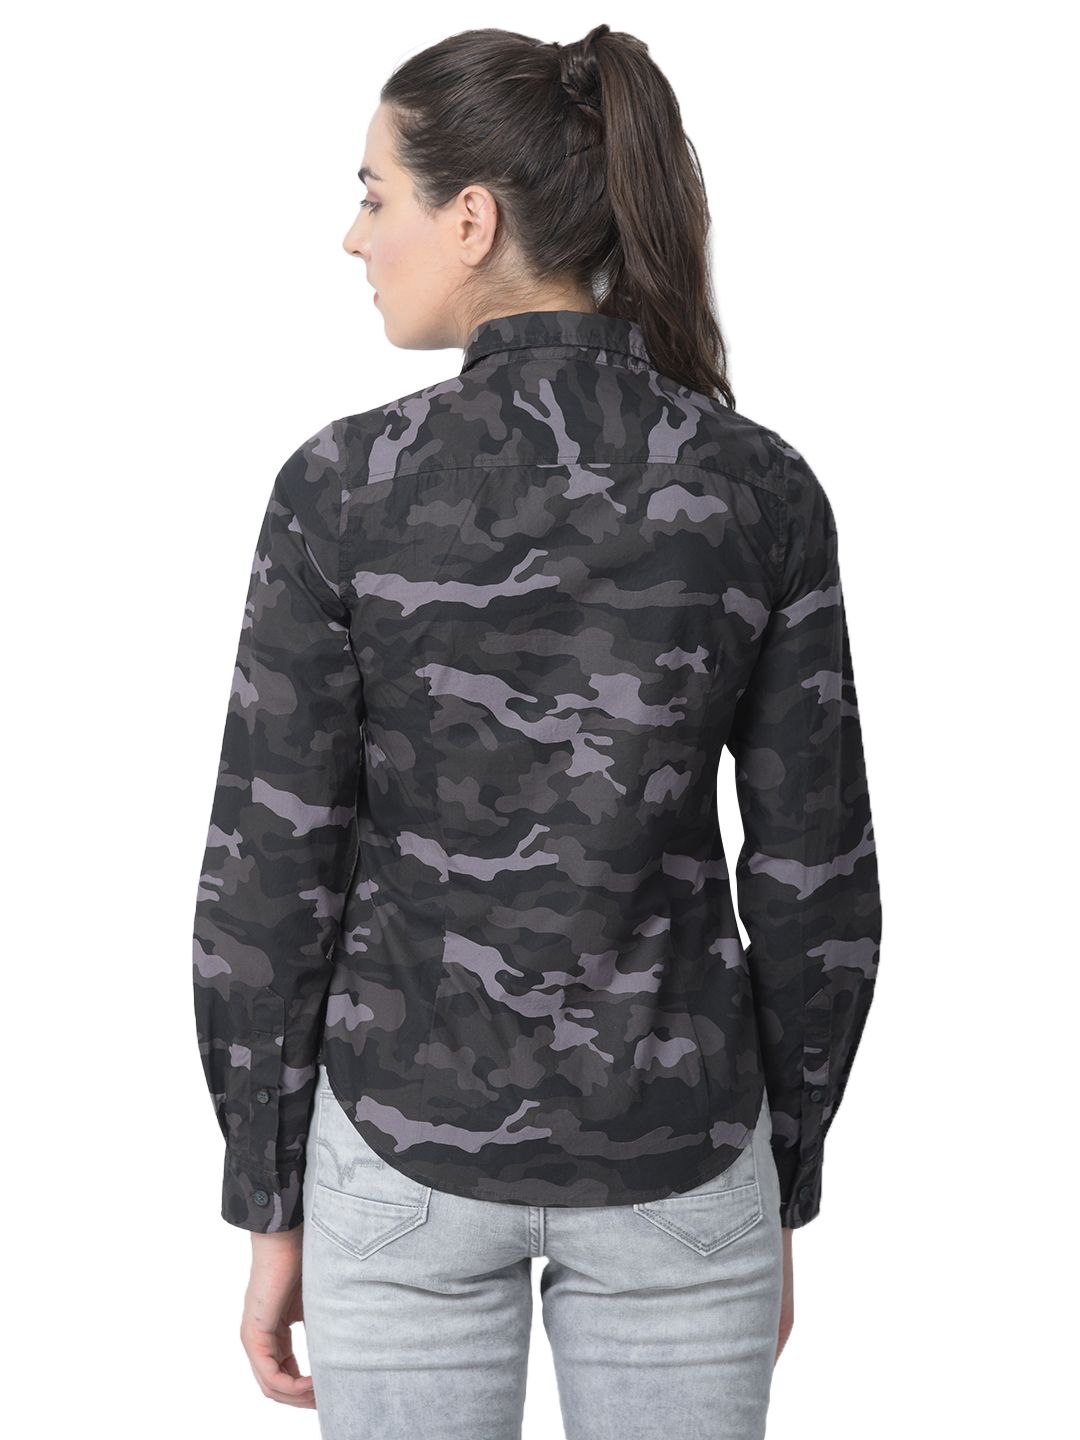 Camouflage grey shirt for women